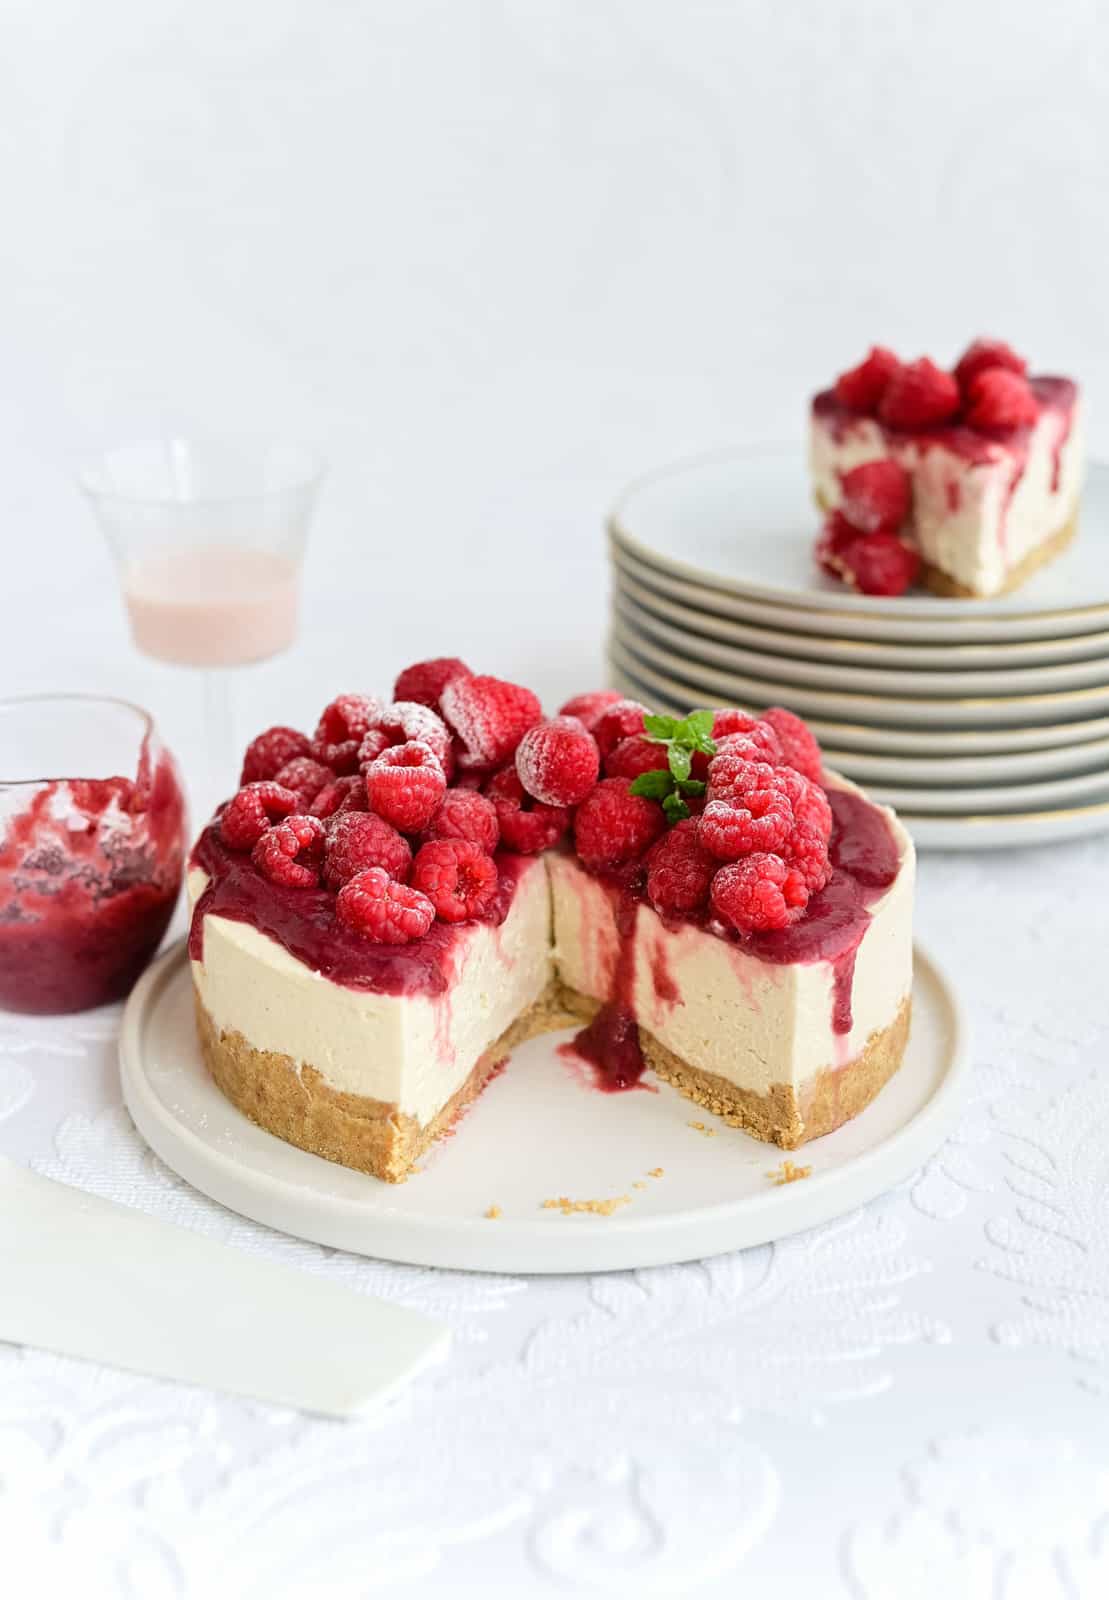 White Chocolate Raspberry Cheesecake topped with fresh raspberries on a white plate with a large slice cut out